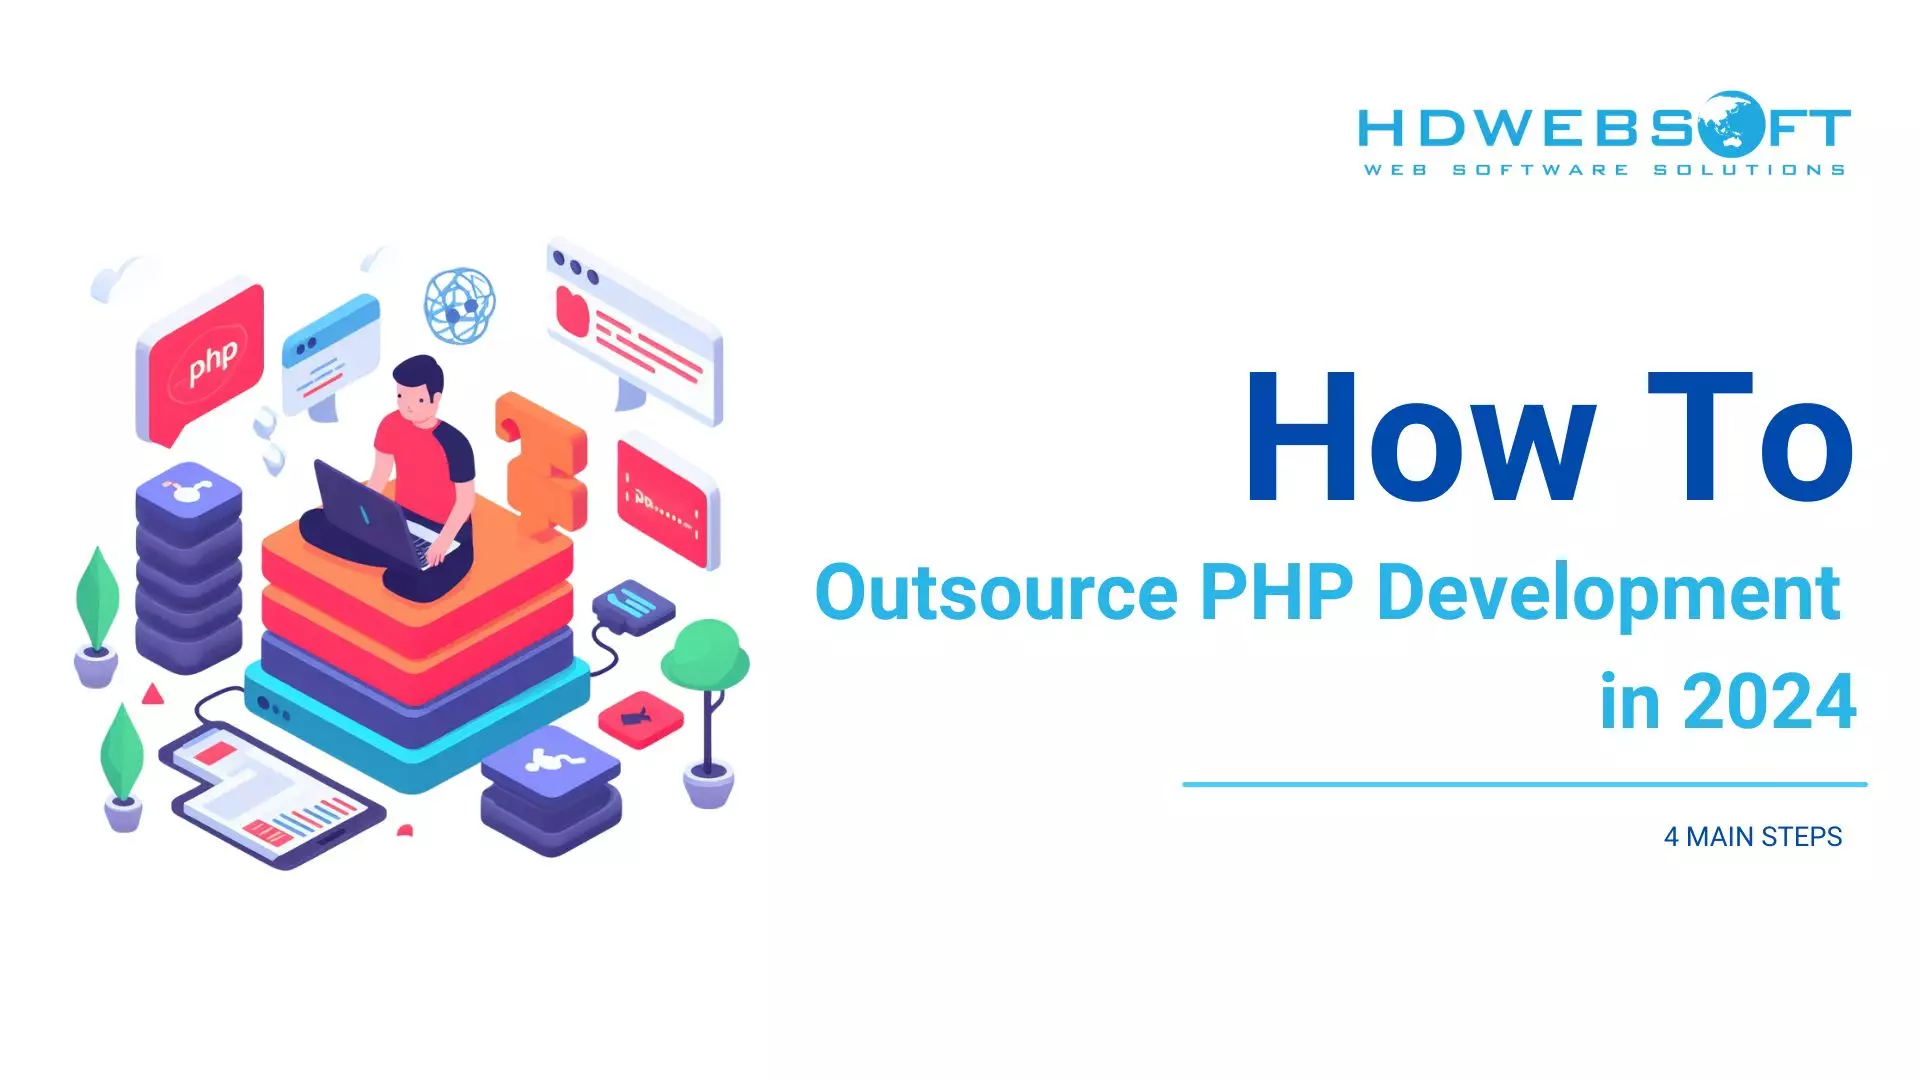 4 Main Steps of Outsourcing PHP Development